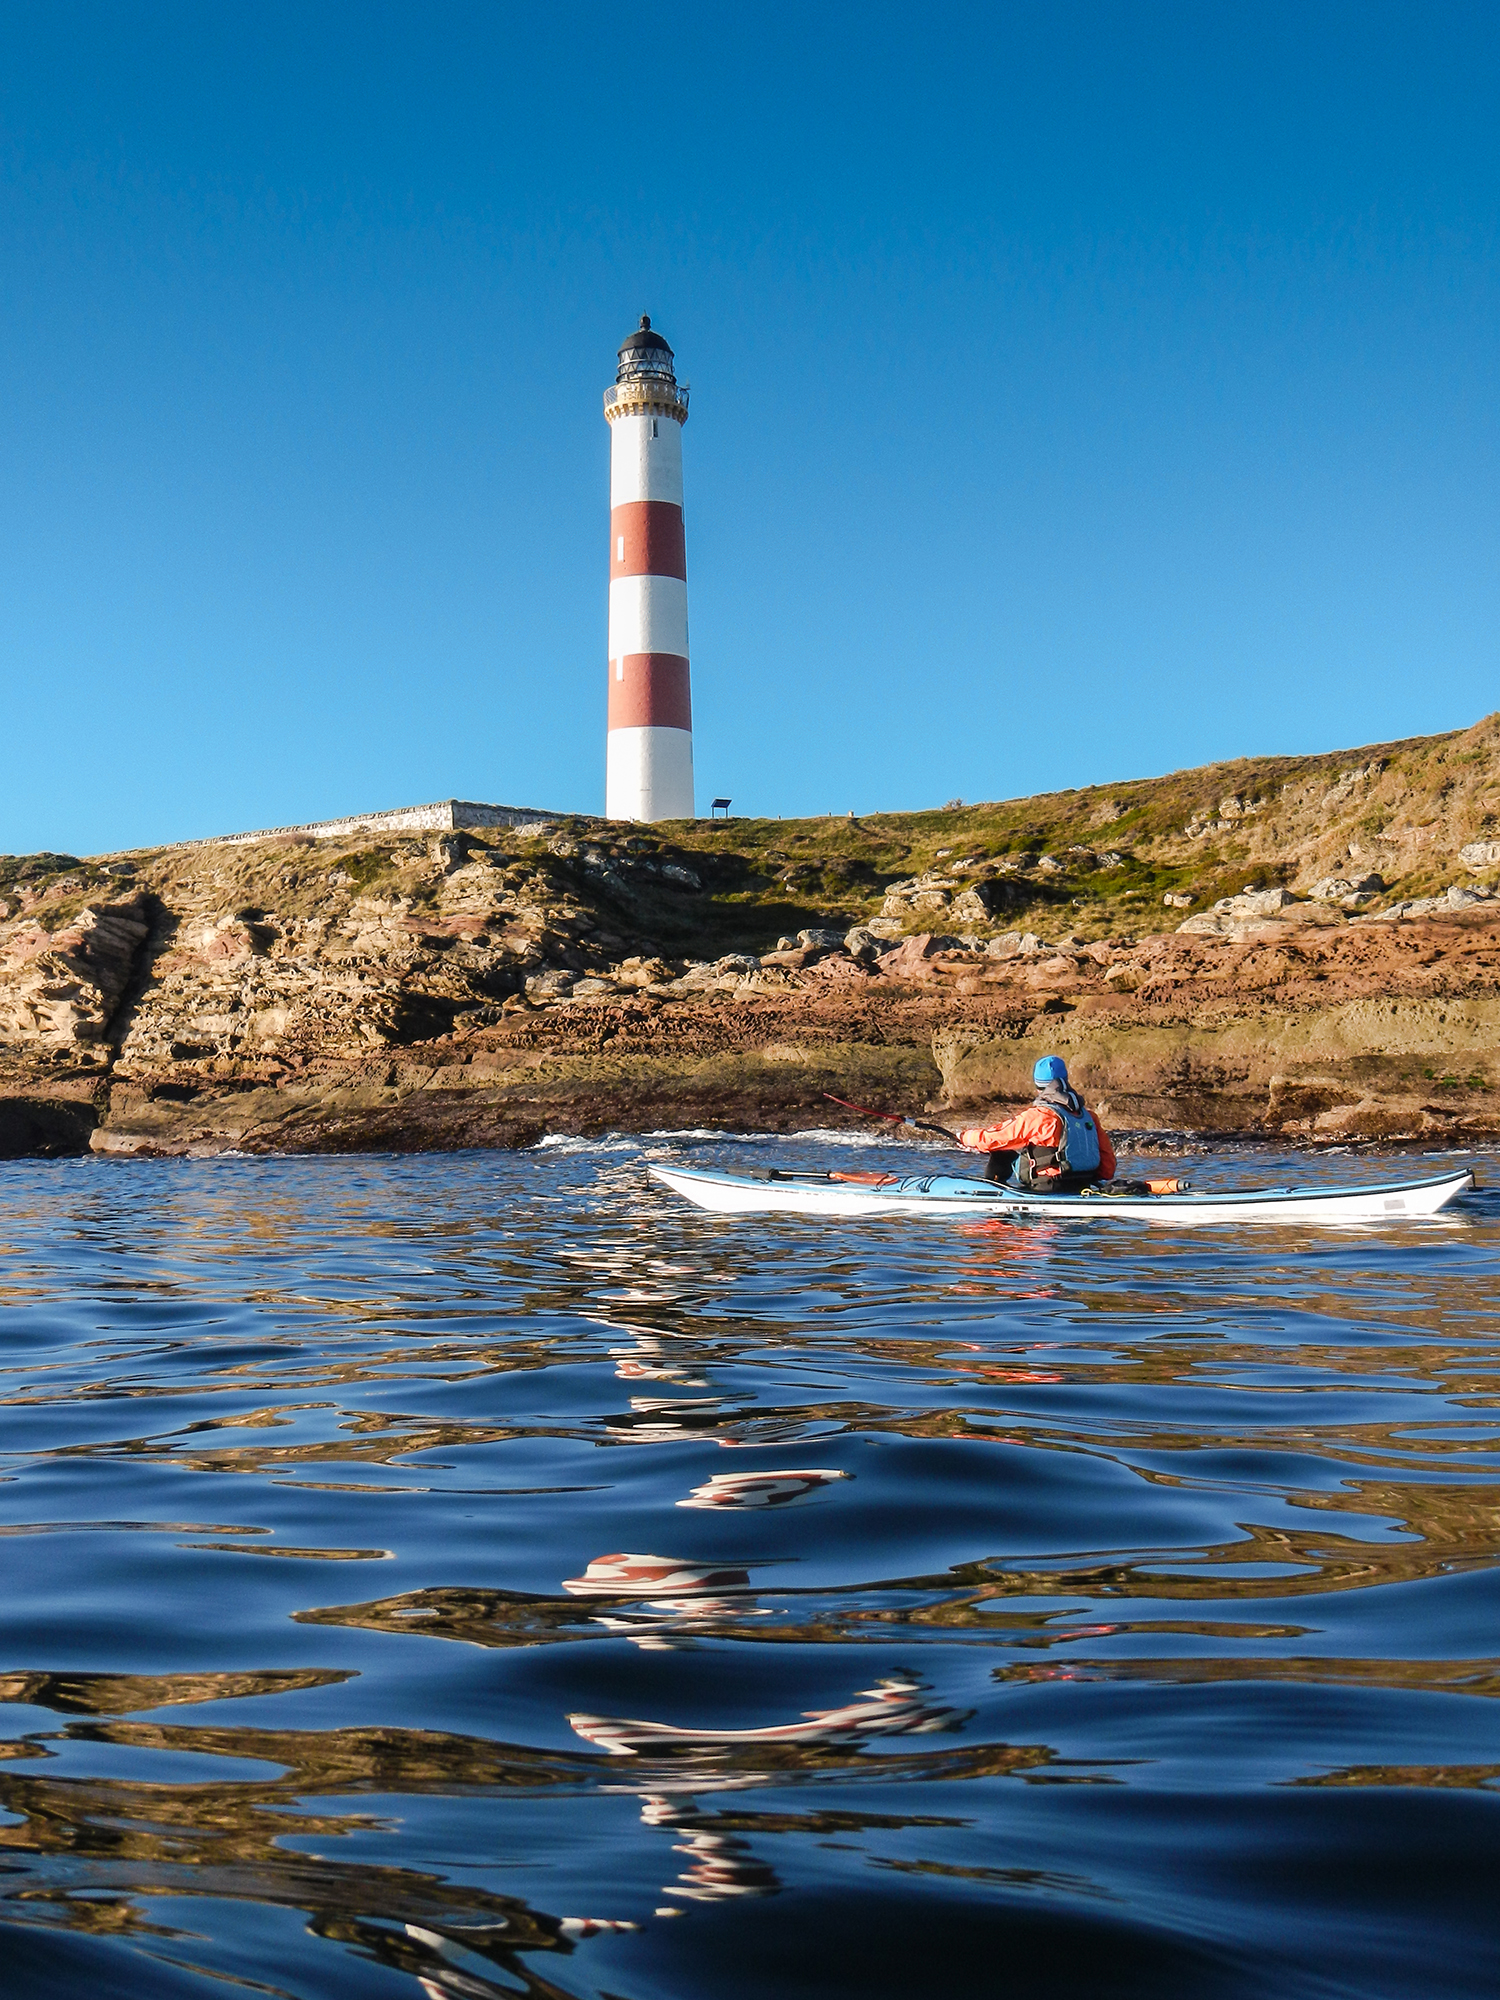 It's not often you get this close to Tarbat Ness in a sea kayak